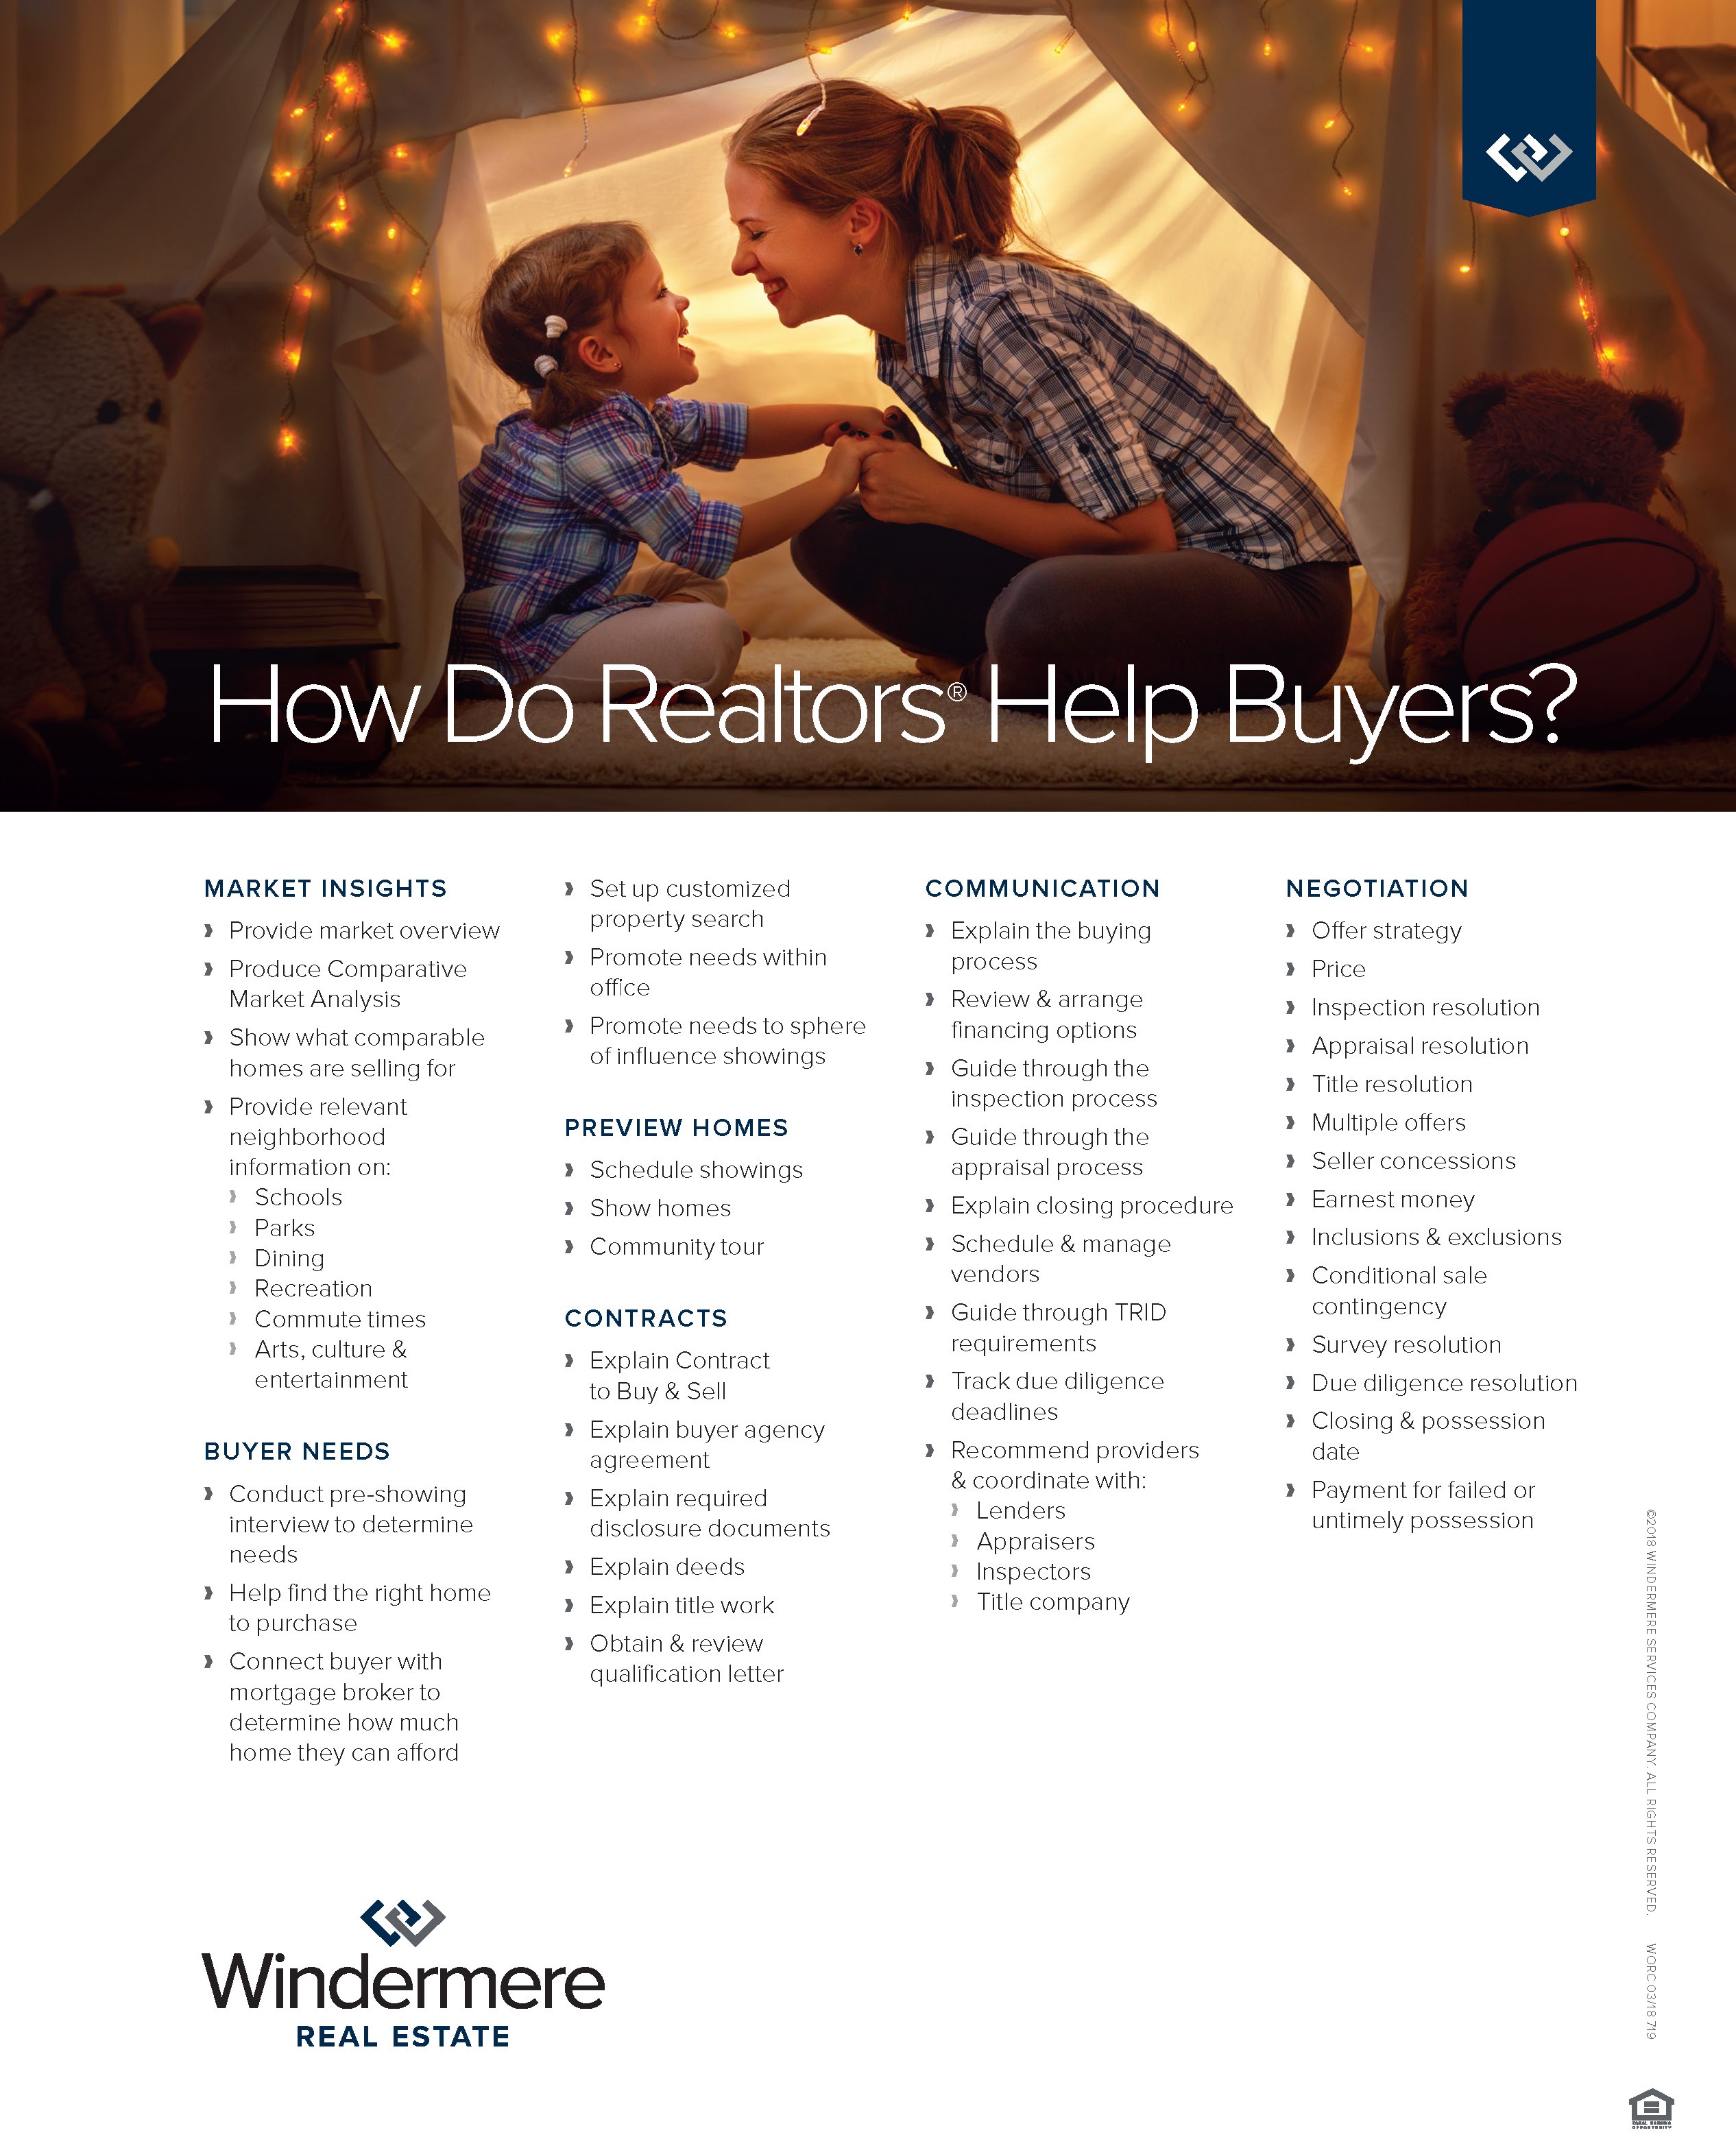 Services Realtors Provide to Buyers